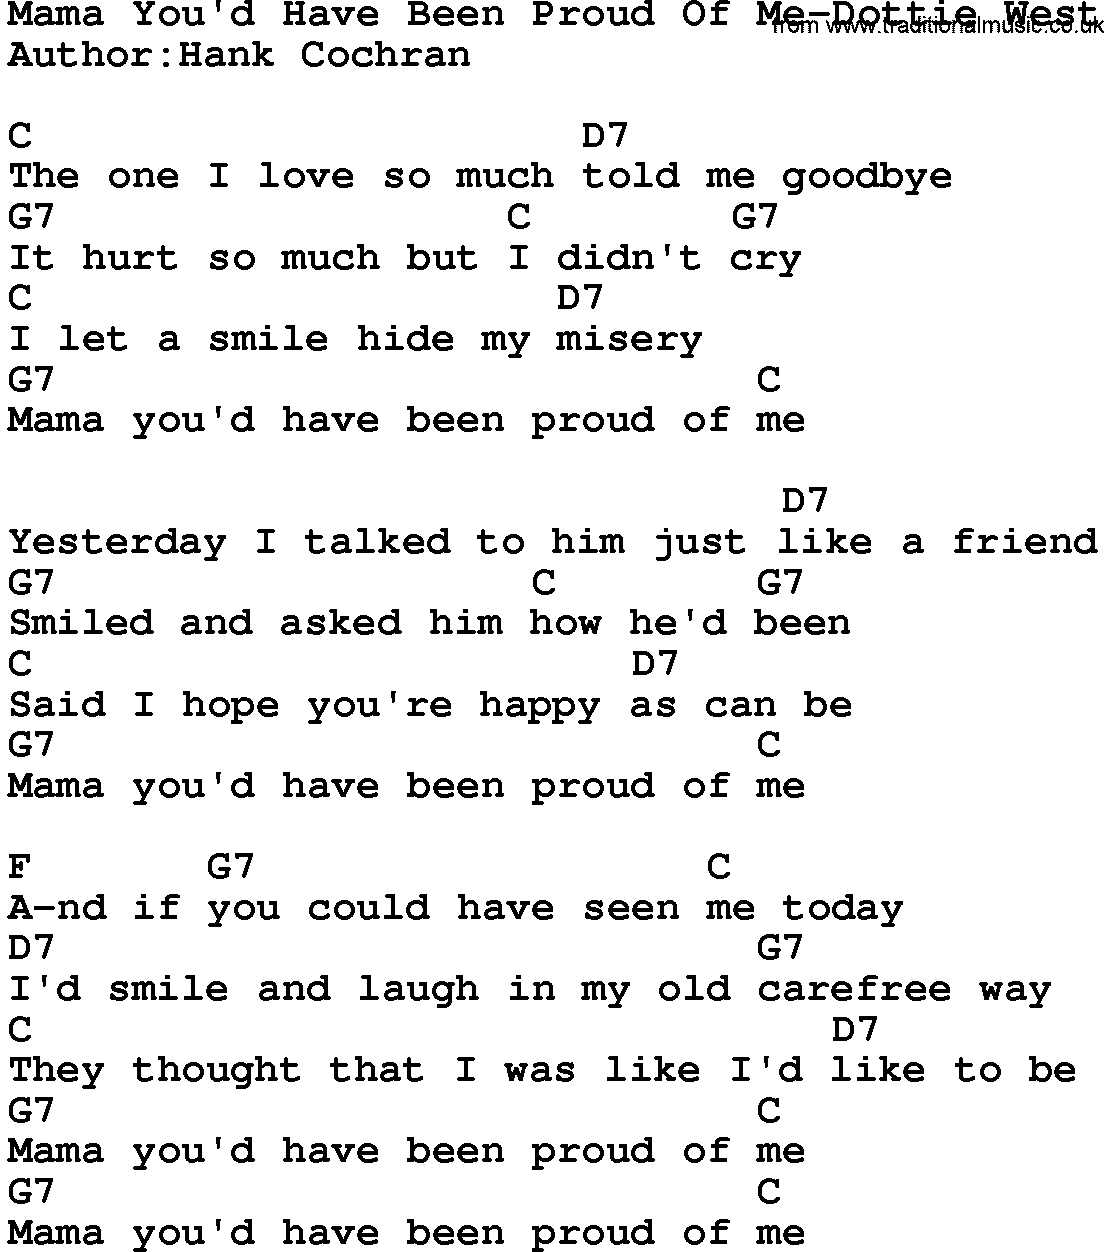 Country music song: Mama You'd Have Been Proud Of Me-Dottie West lyrics and chords